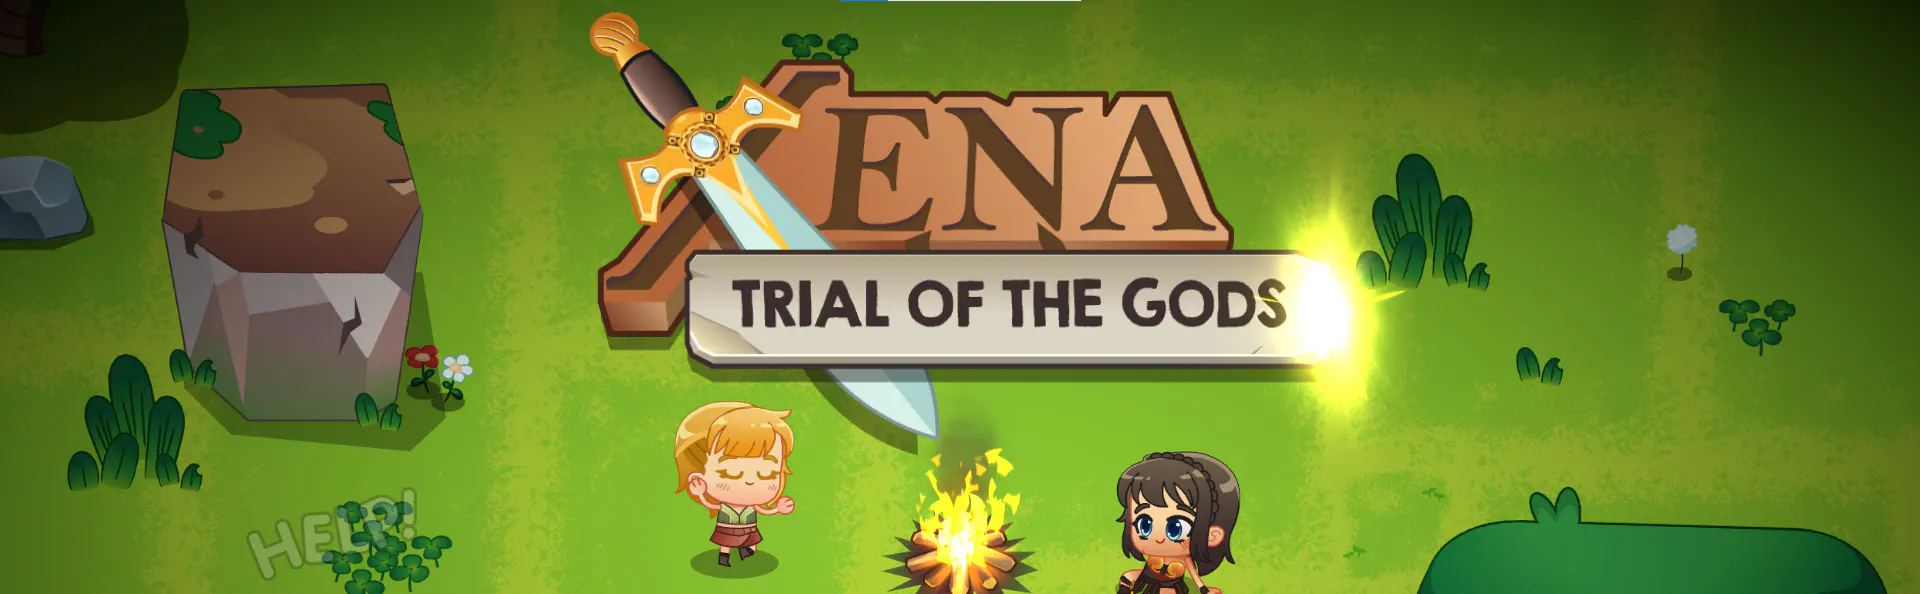 Xena - Trial of the Gods